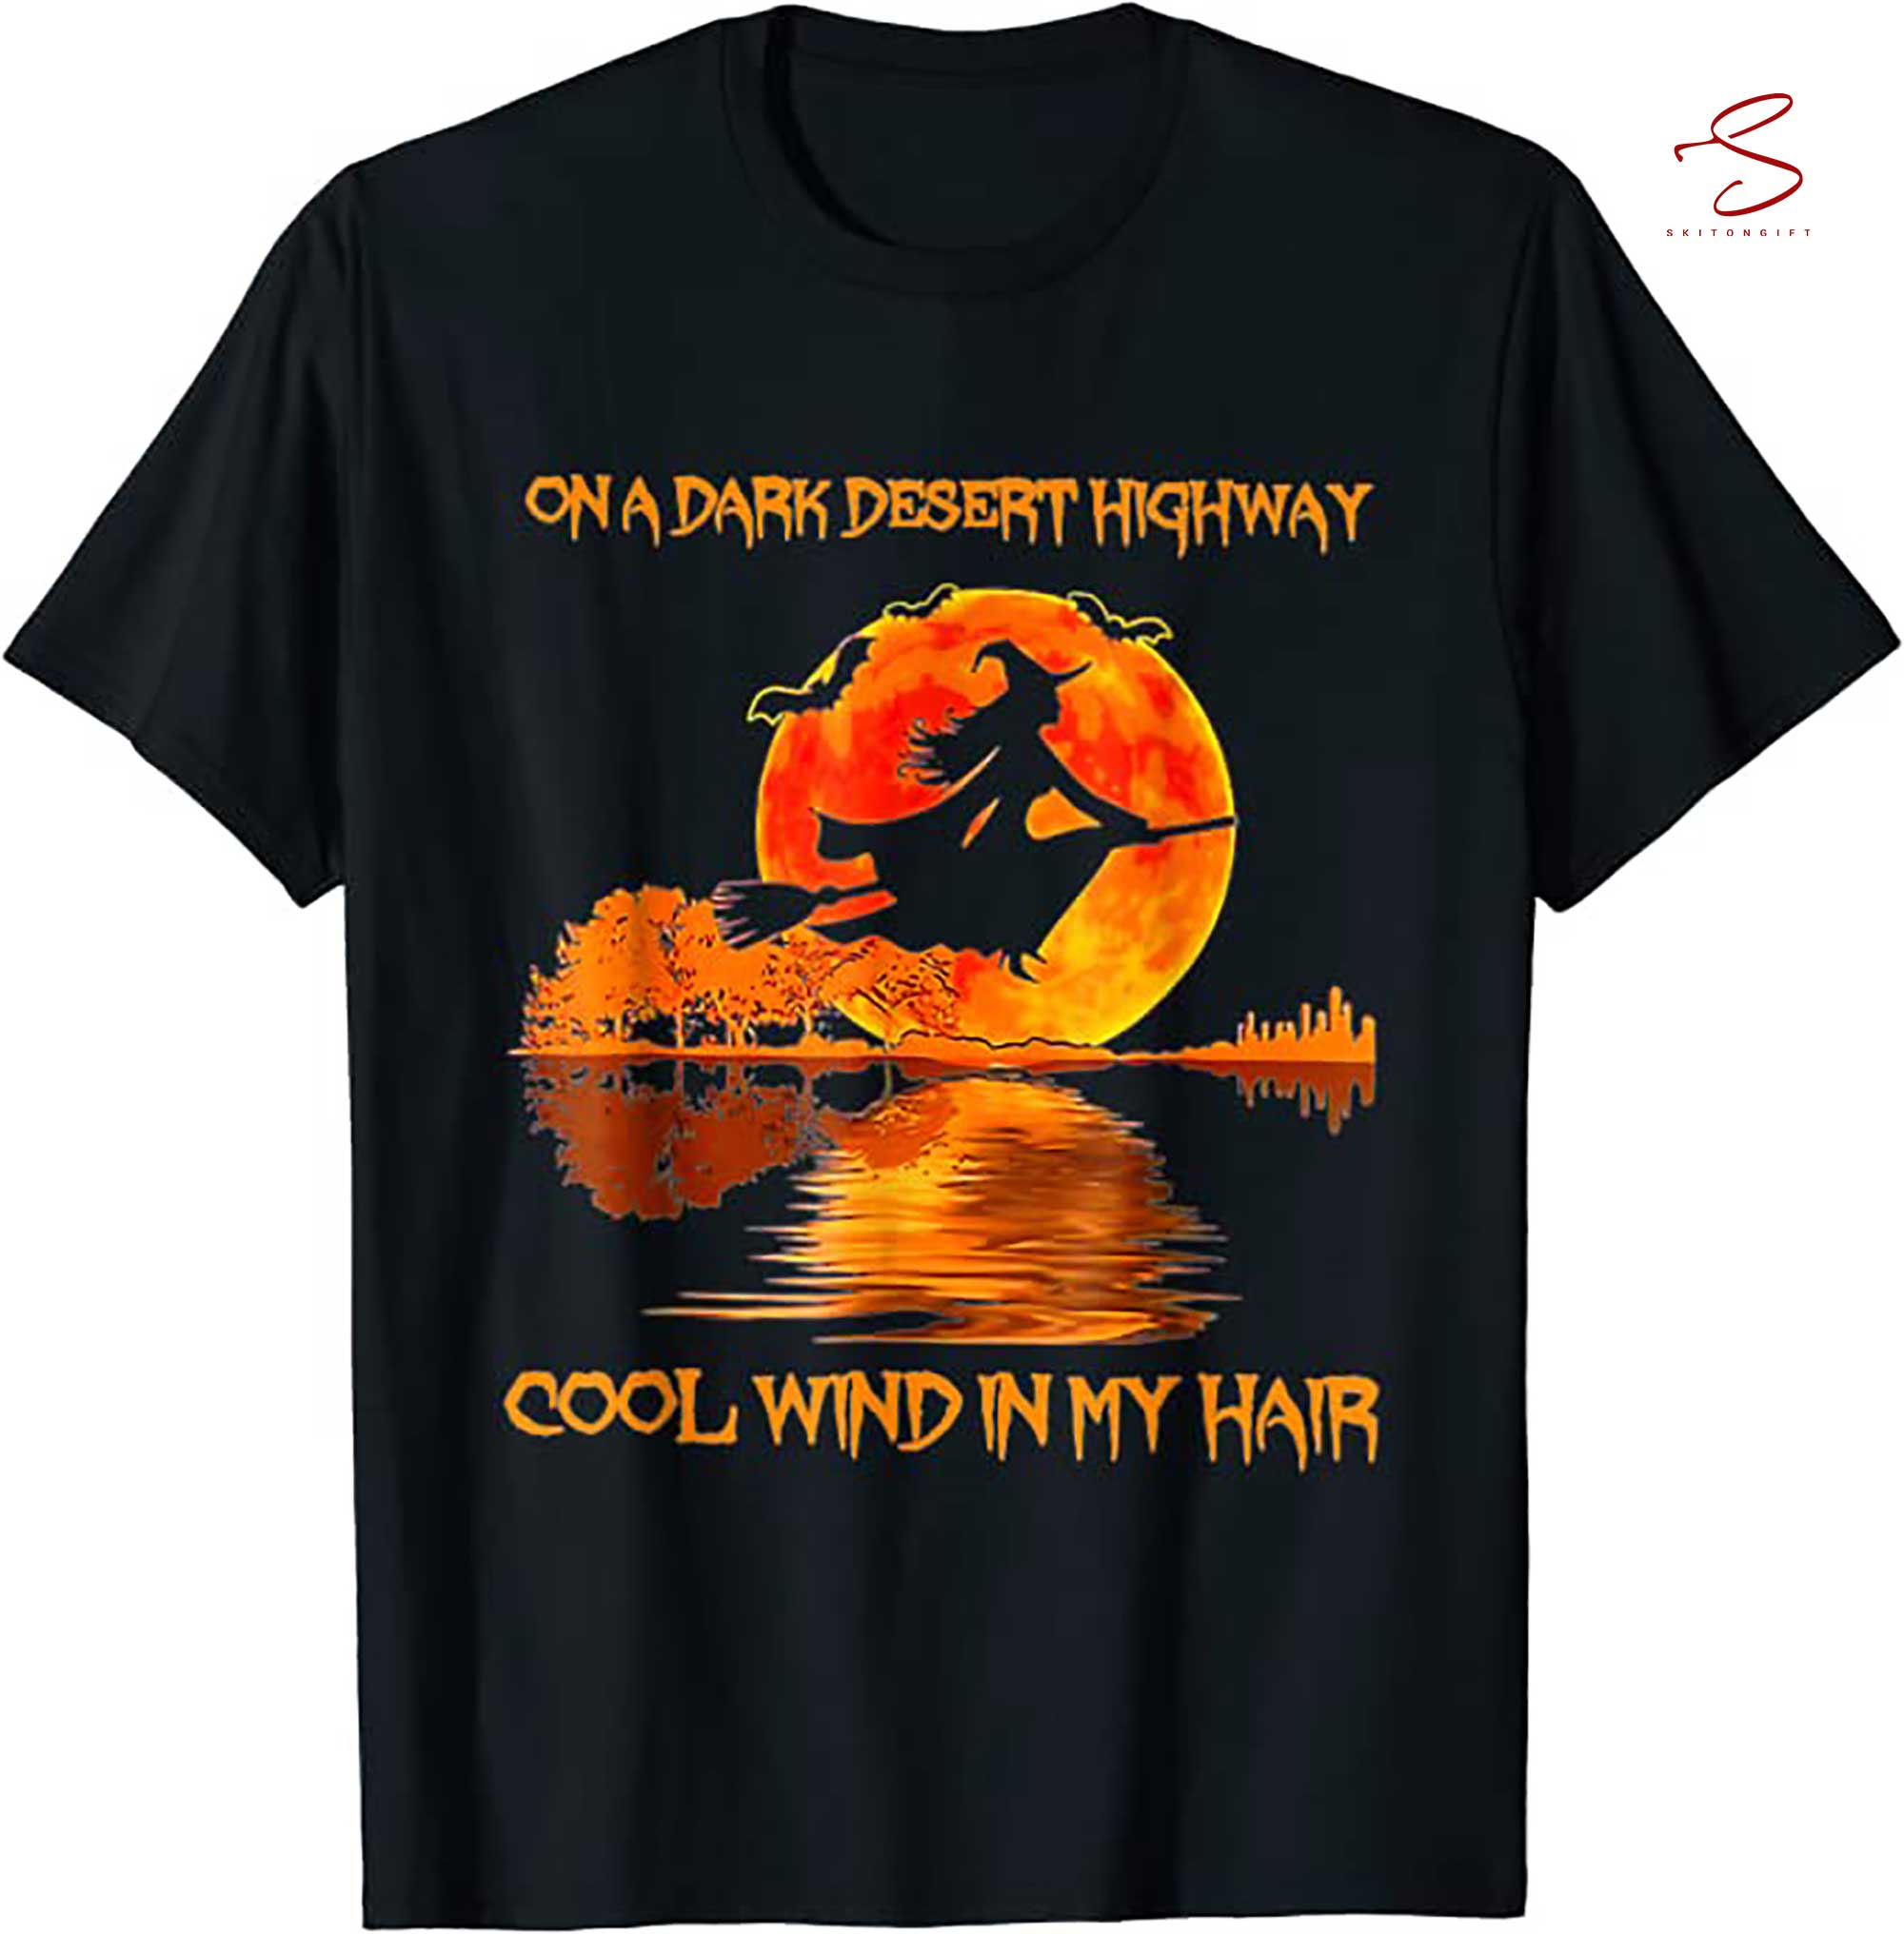 Skitongift Witch Riding Brooms On A Dark Desert Highways Halloween T Shirt Funny Shirts Hoodie Long Short Sleeve Casual Shirt